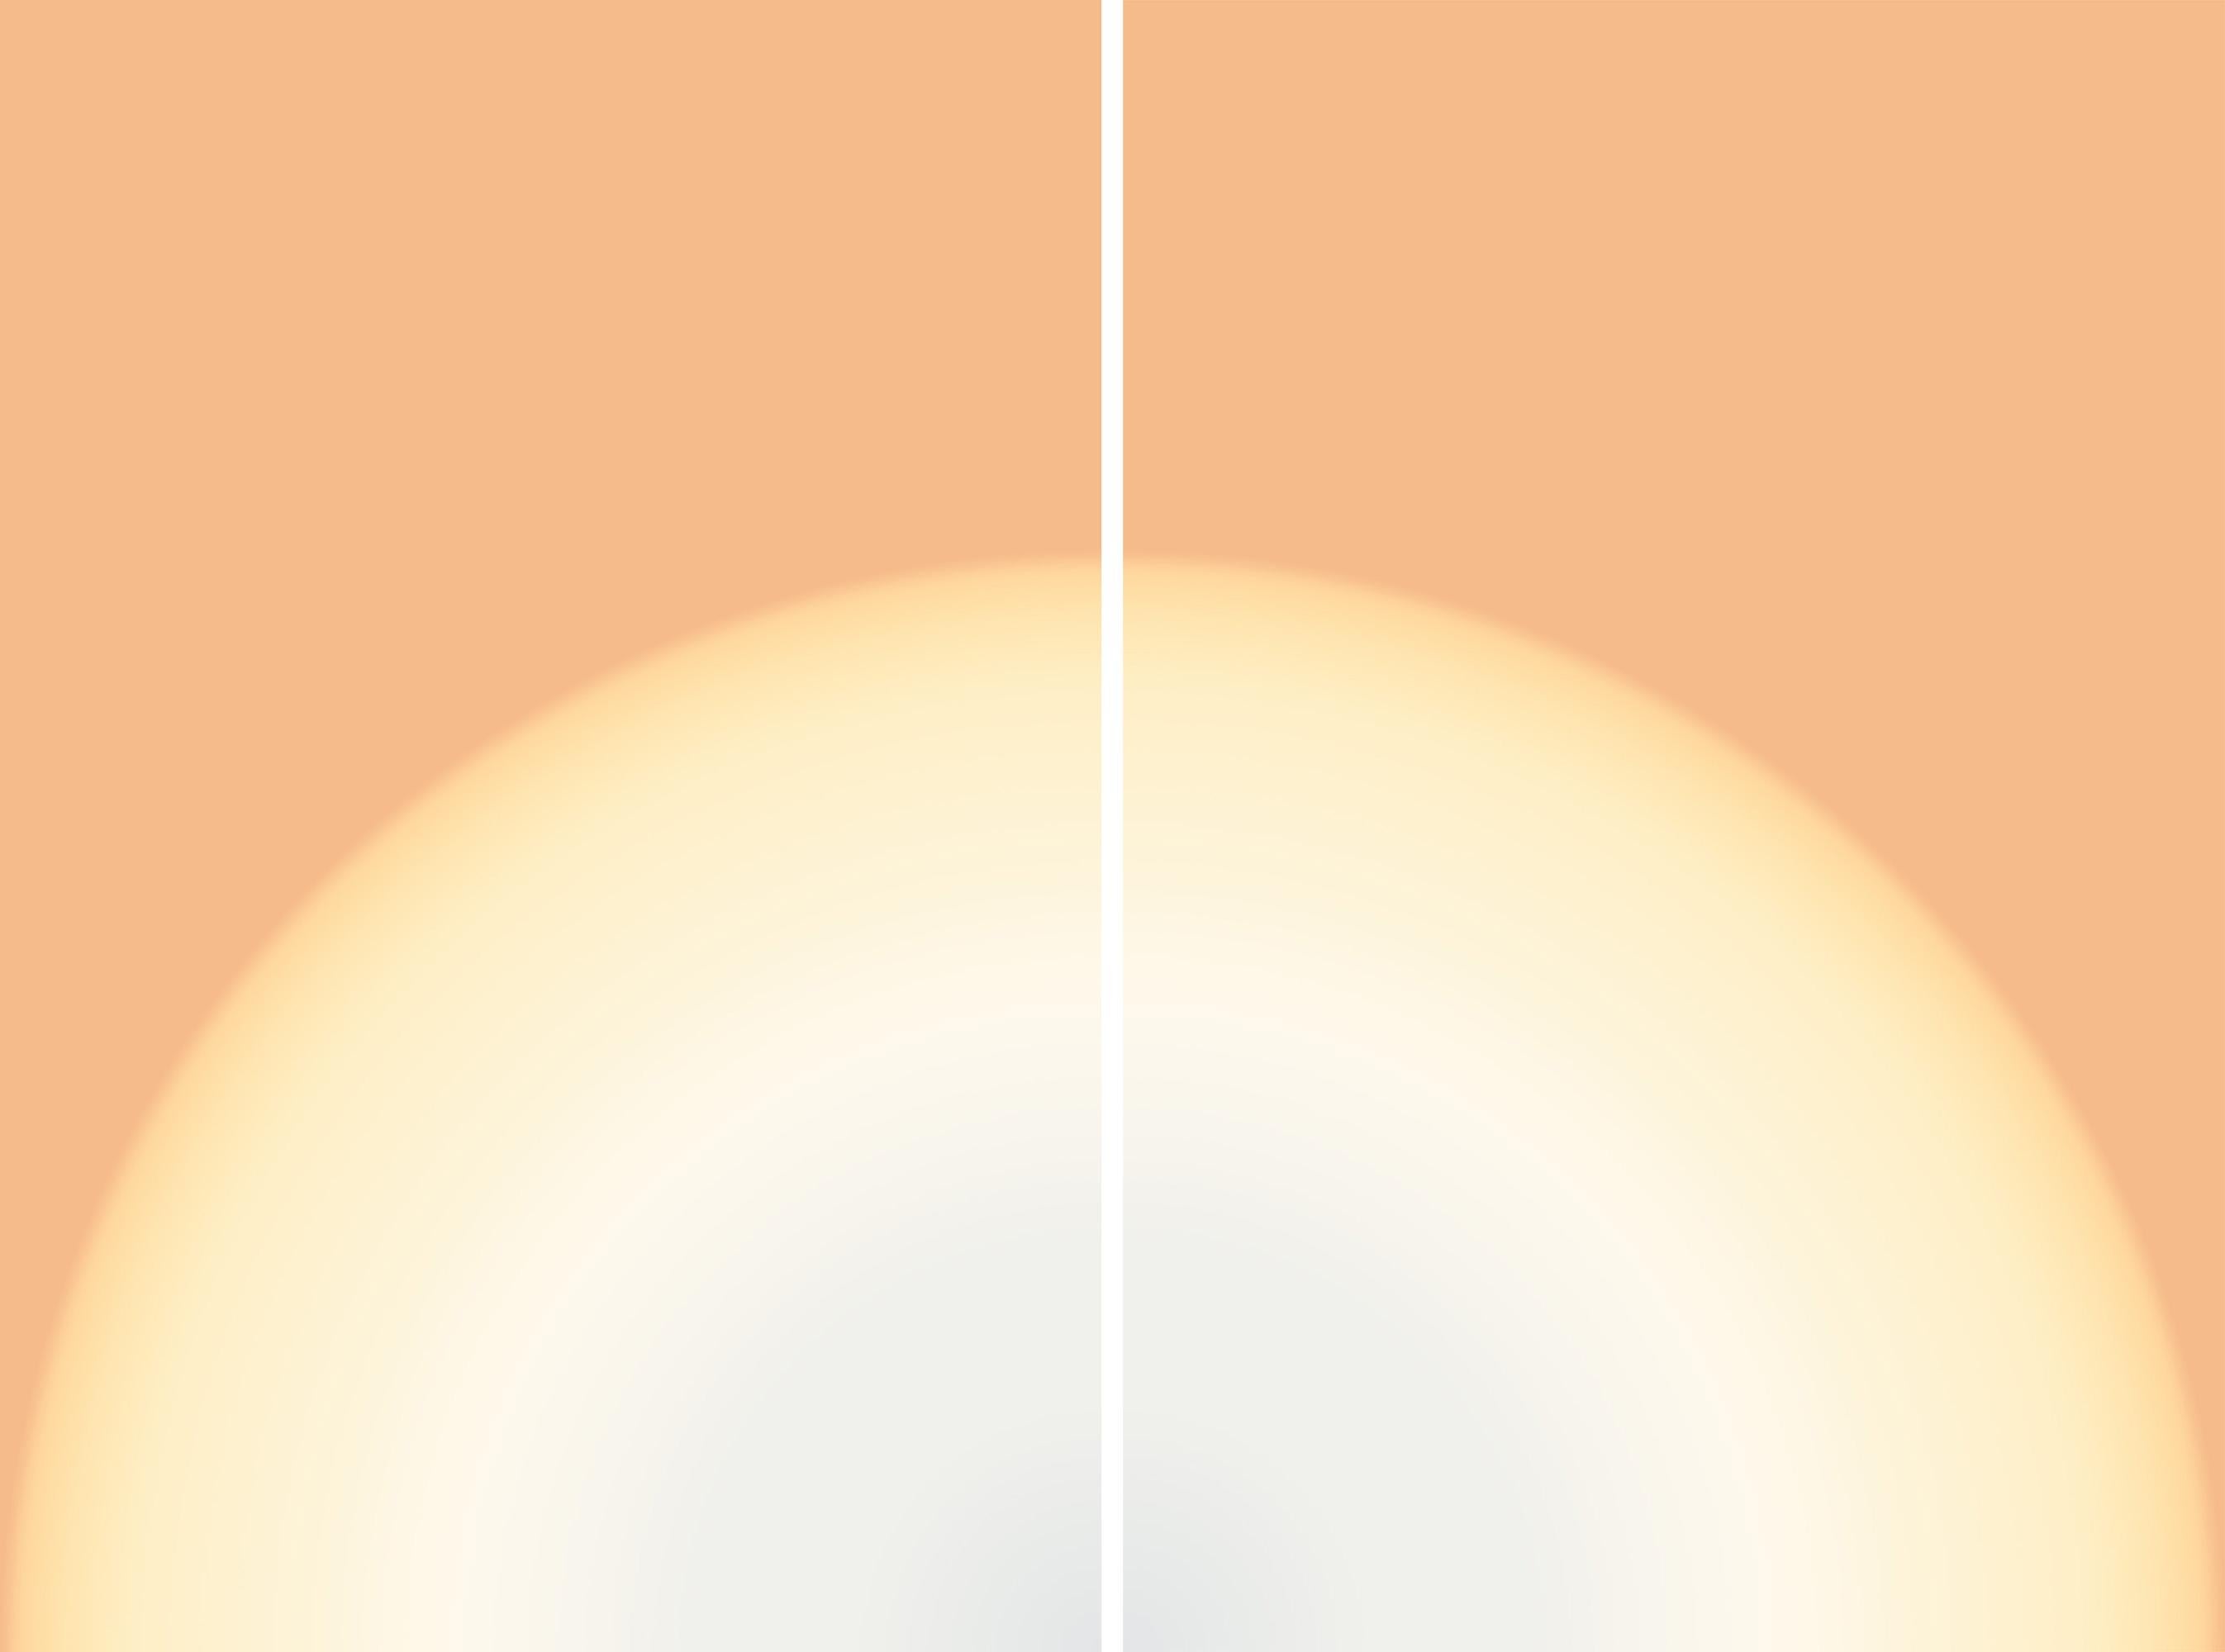 Ryan Rivadeneyra Color Photograph - The Sun, Golden Colors, Warm Tones Diptych, Space Age, Abstract Geometry Hue  